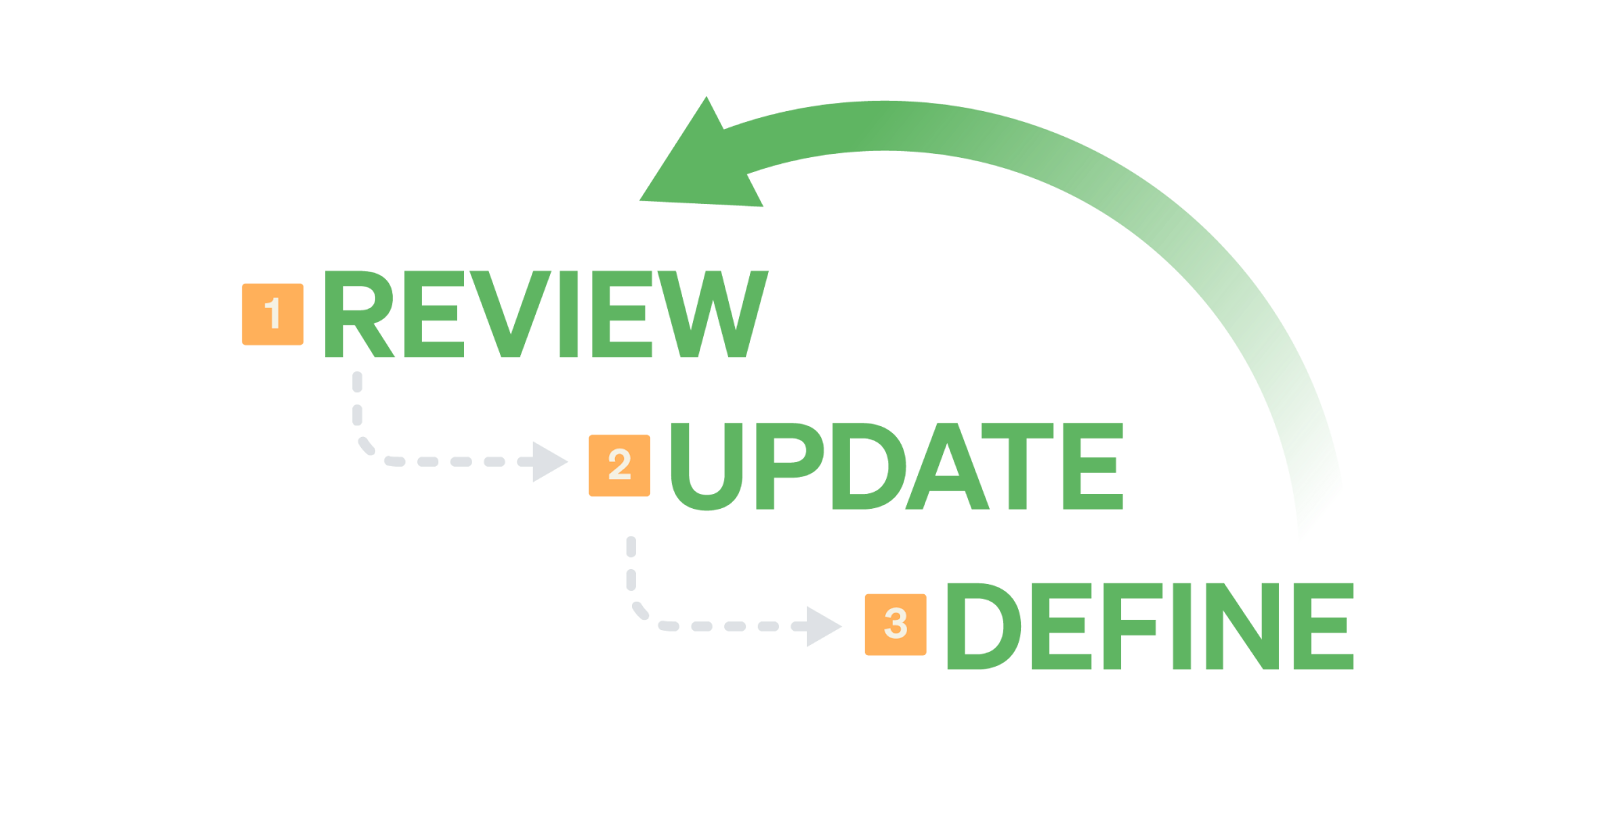 Best practices for simplified agile test planning: Review, update, define
